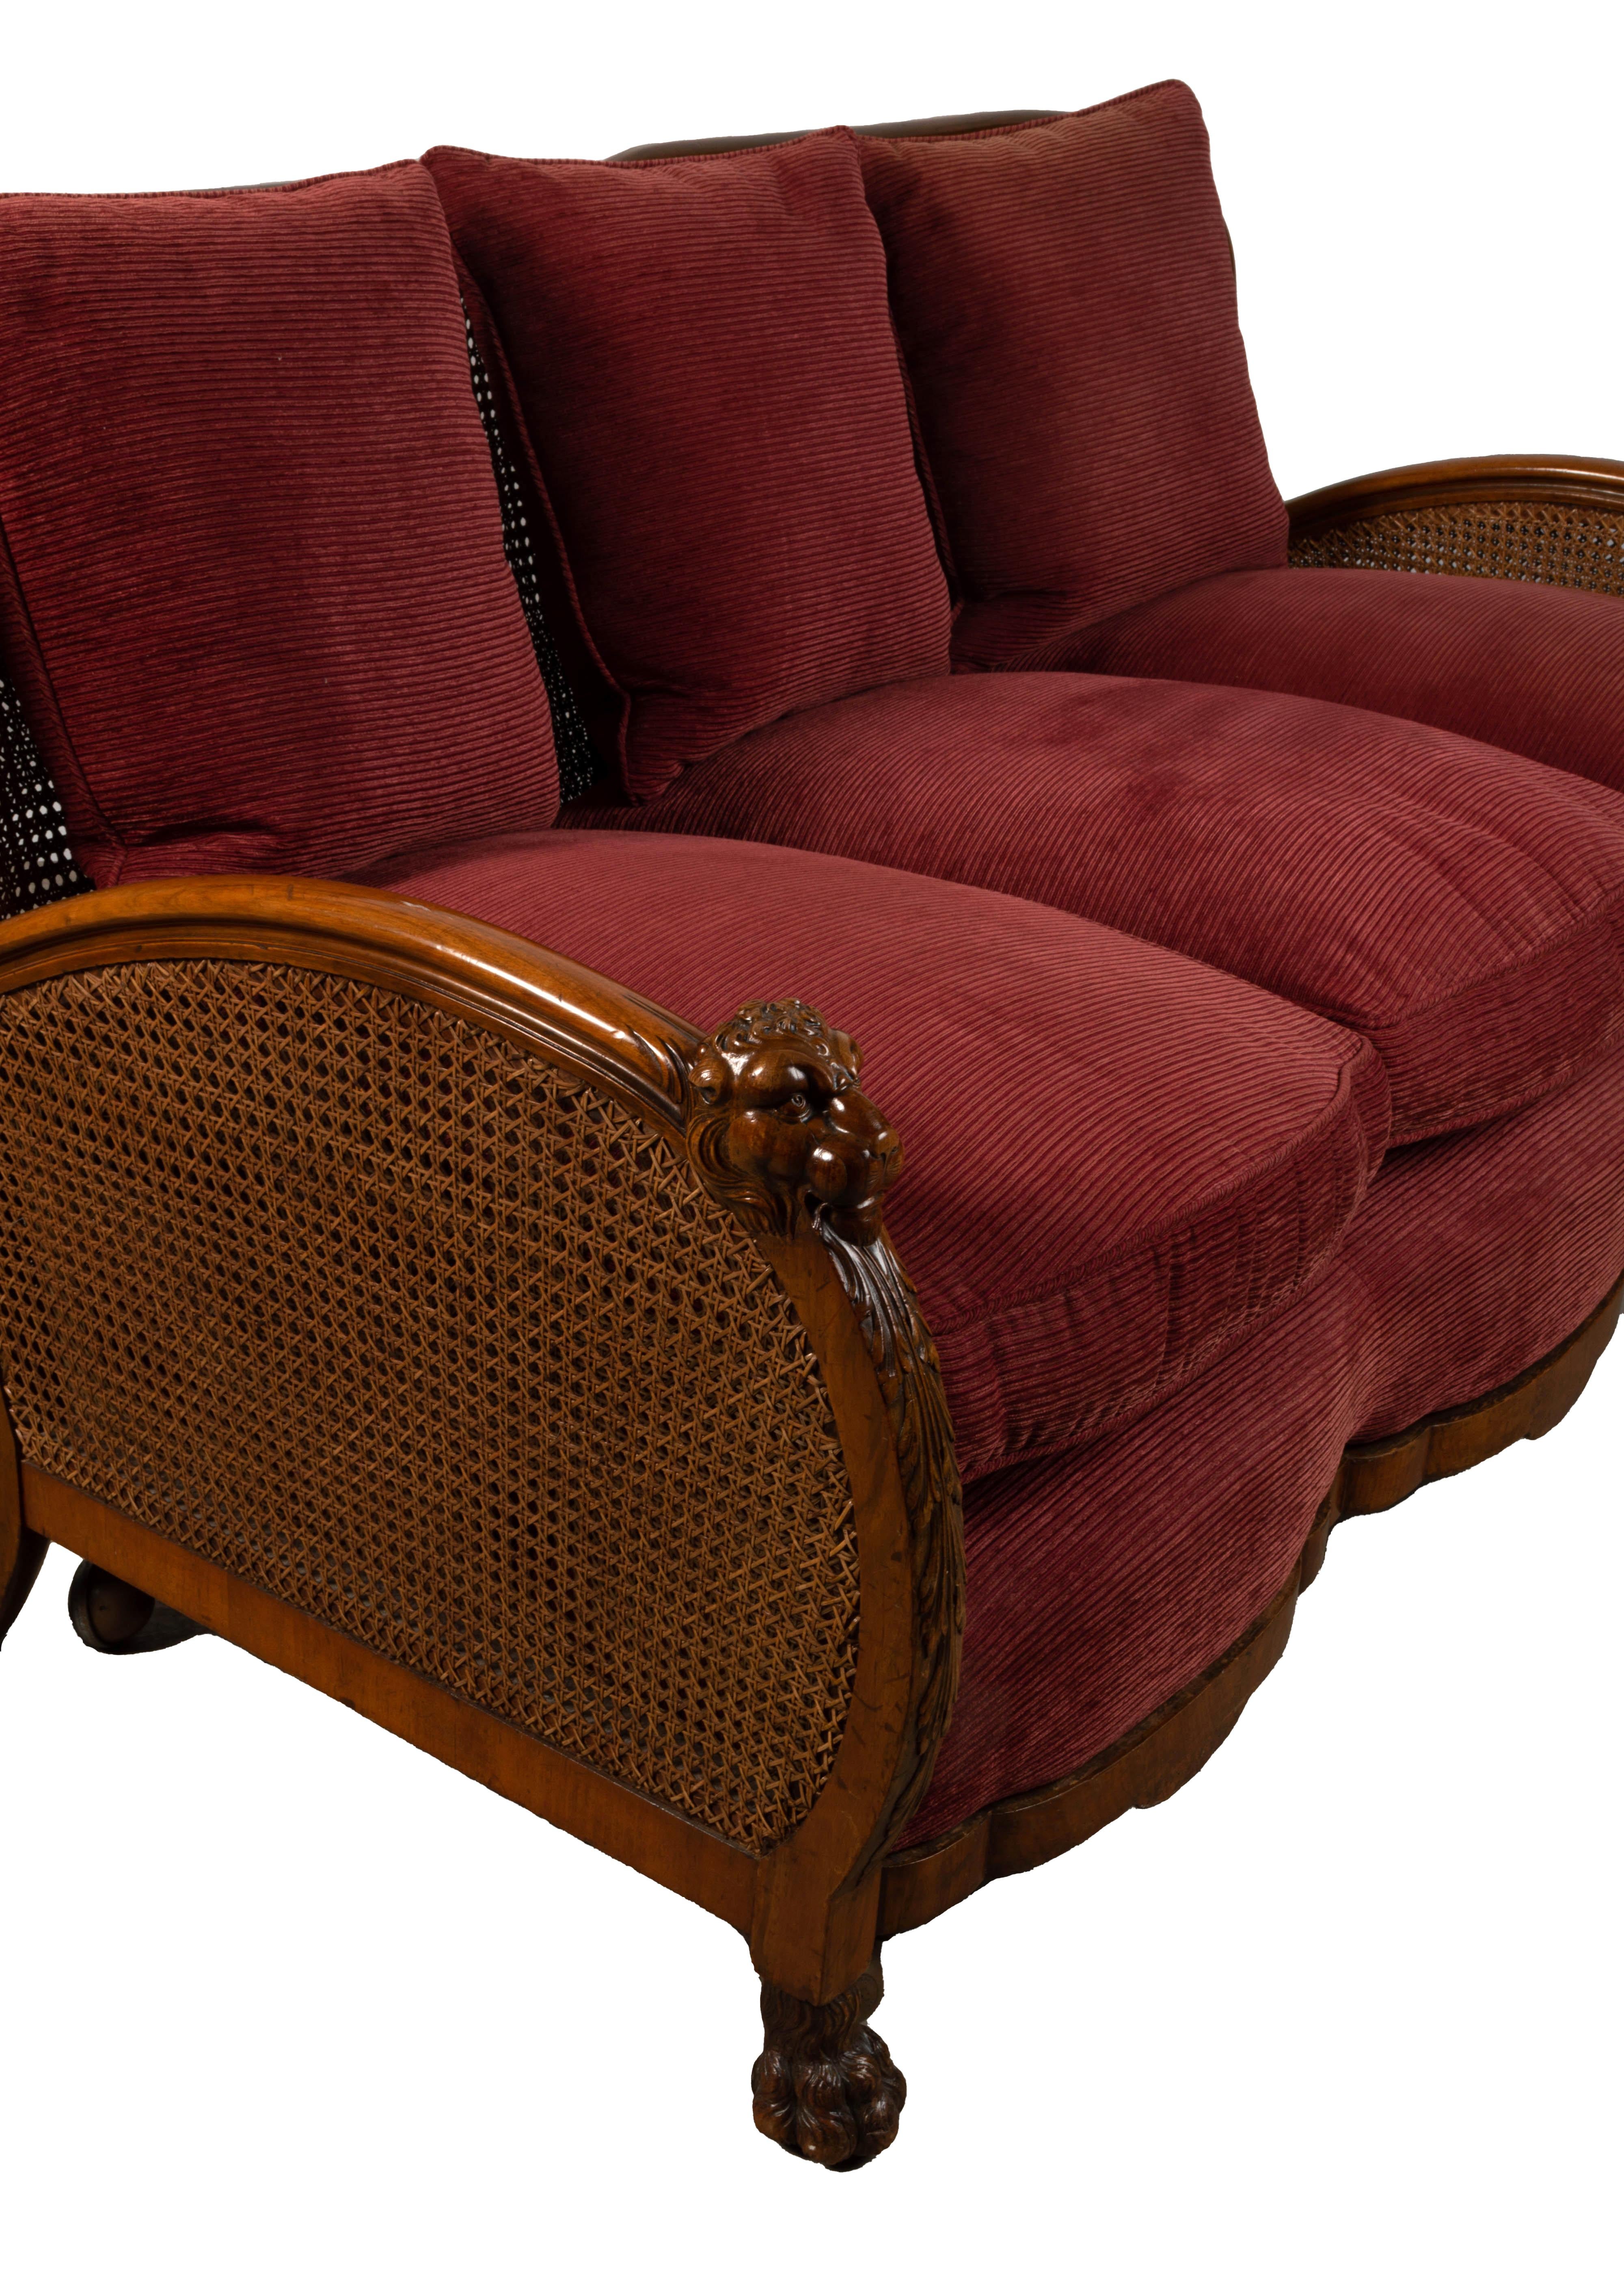 English Art Deco Walnut Framed Cane Bergere Sofa C.1920 In Good Condition For Sale In London, GB